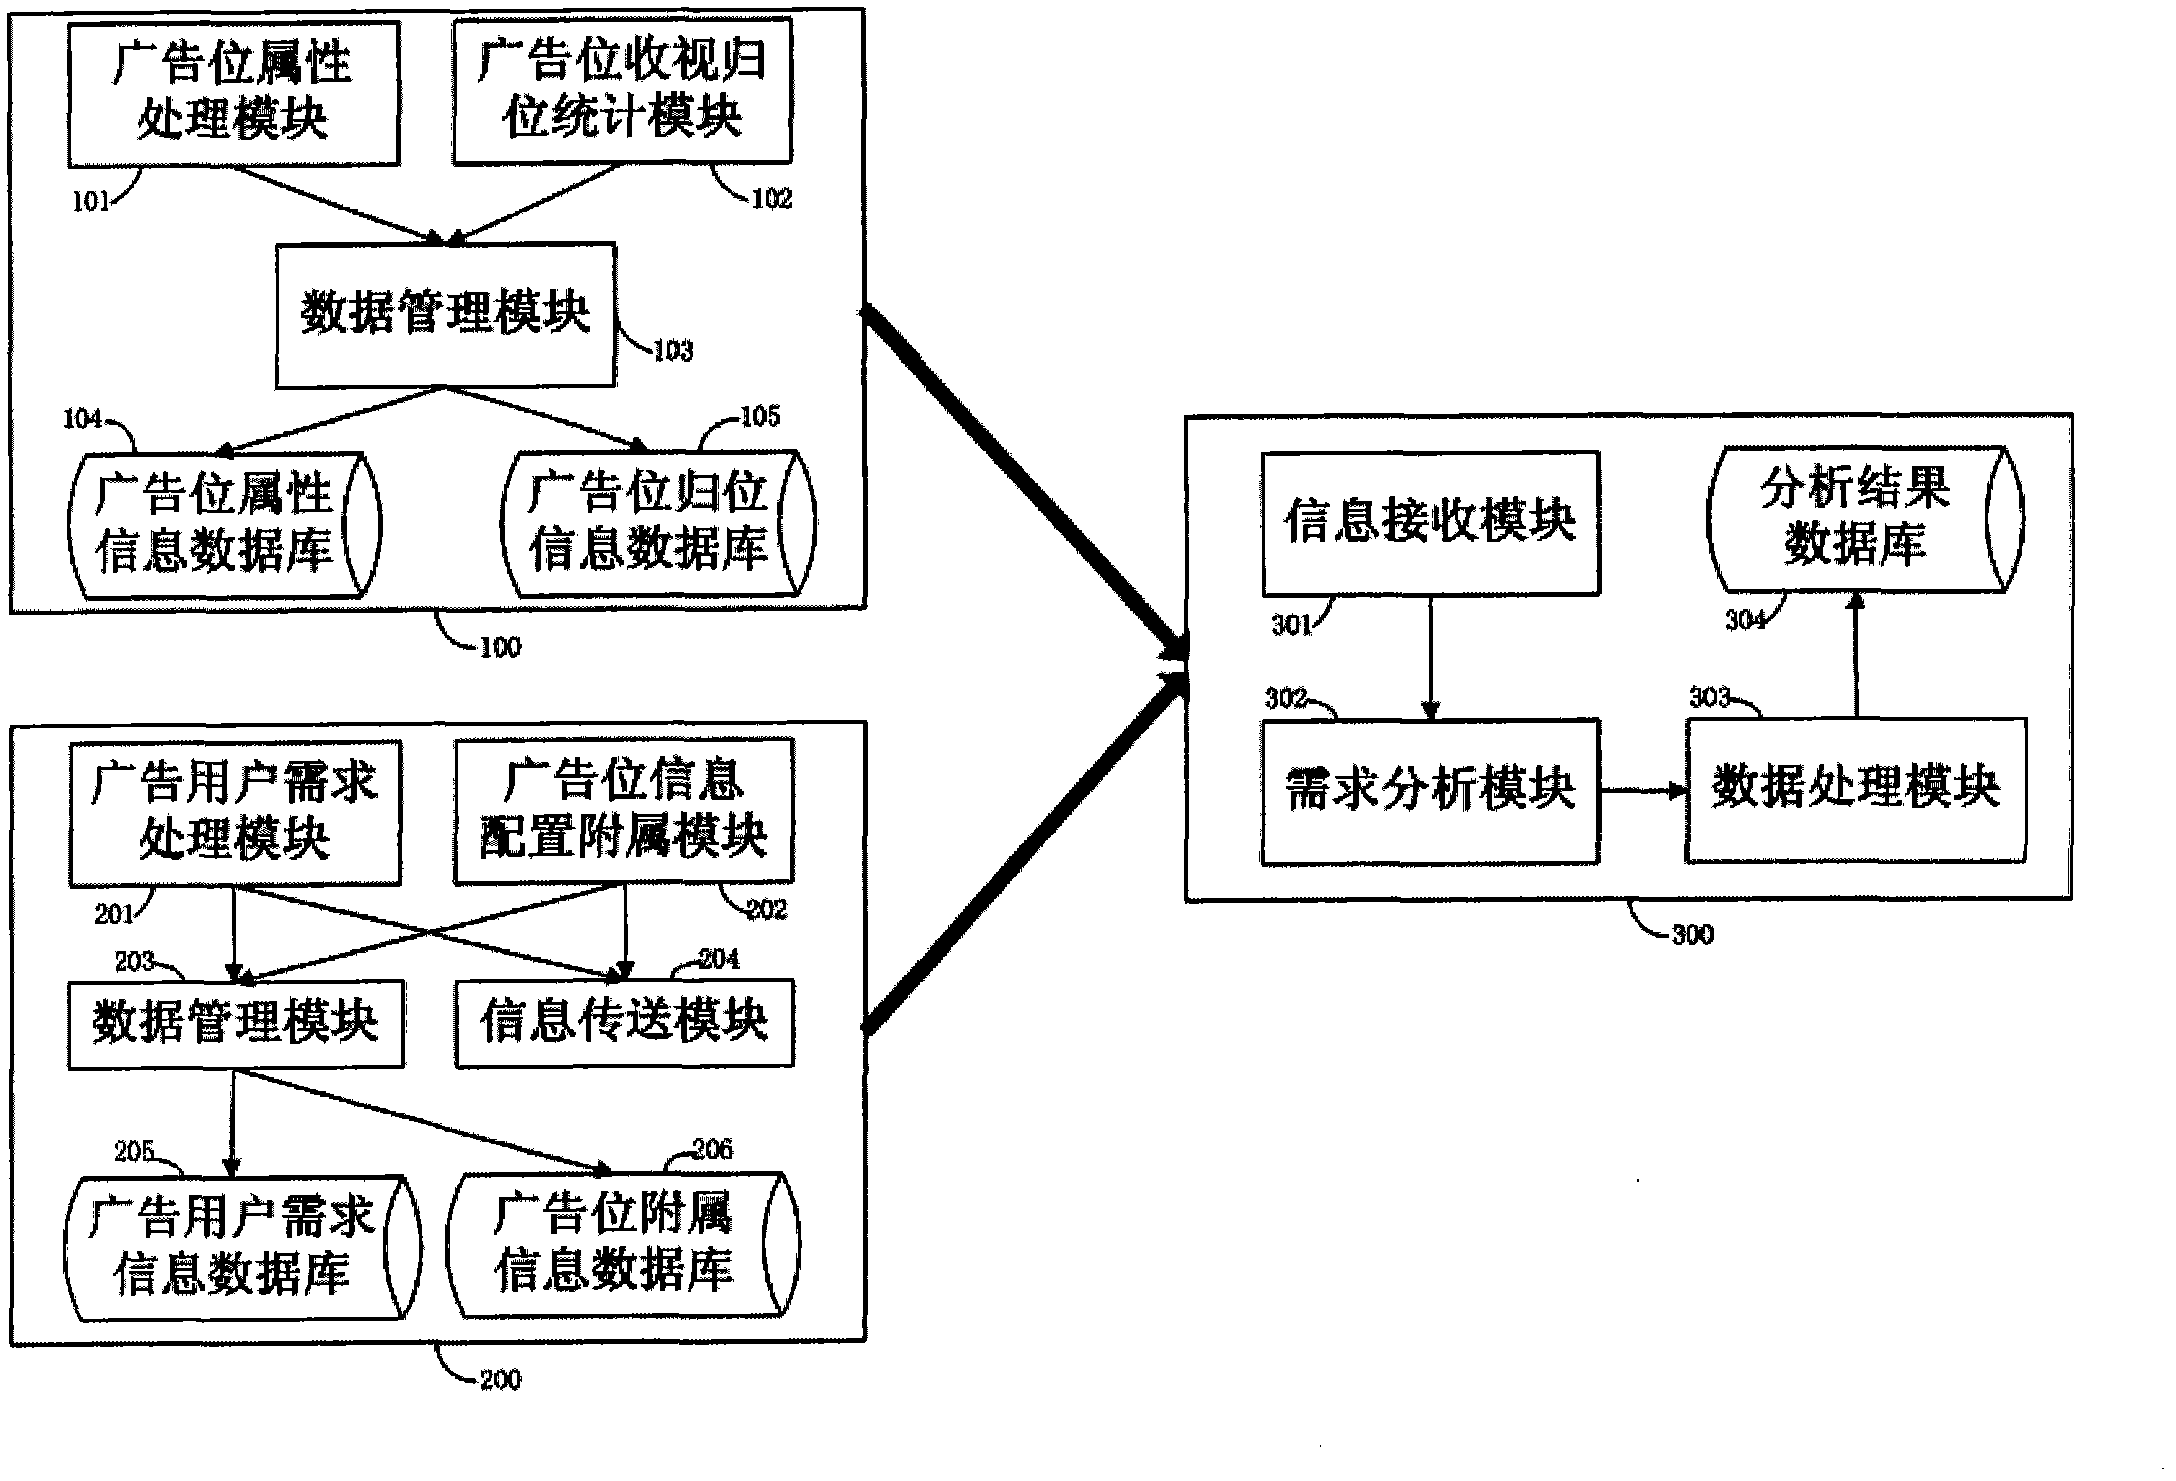 Television advertisement-delivery analysis system and method